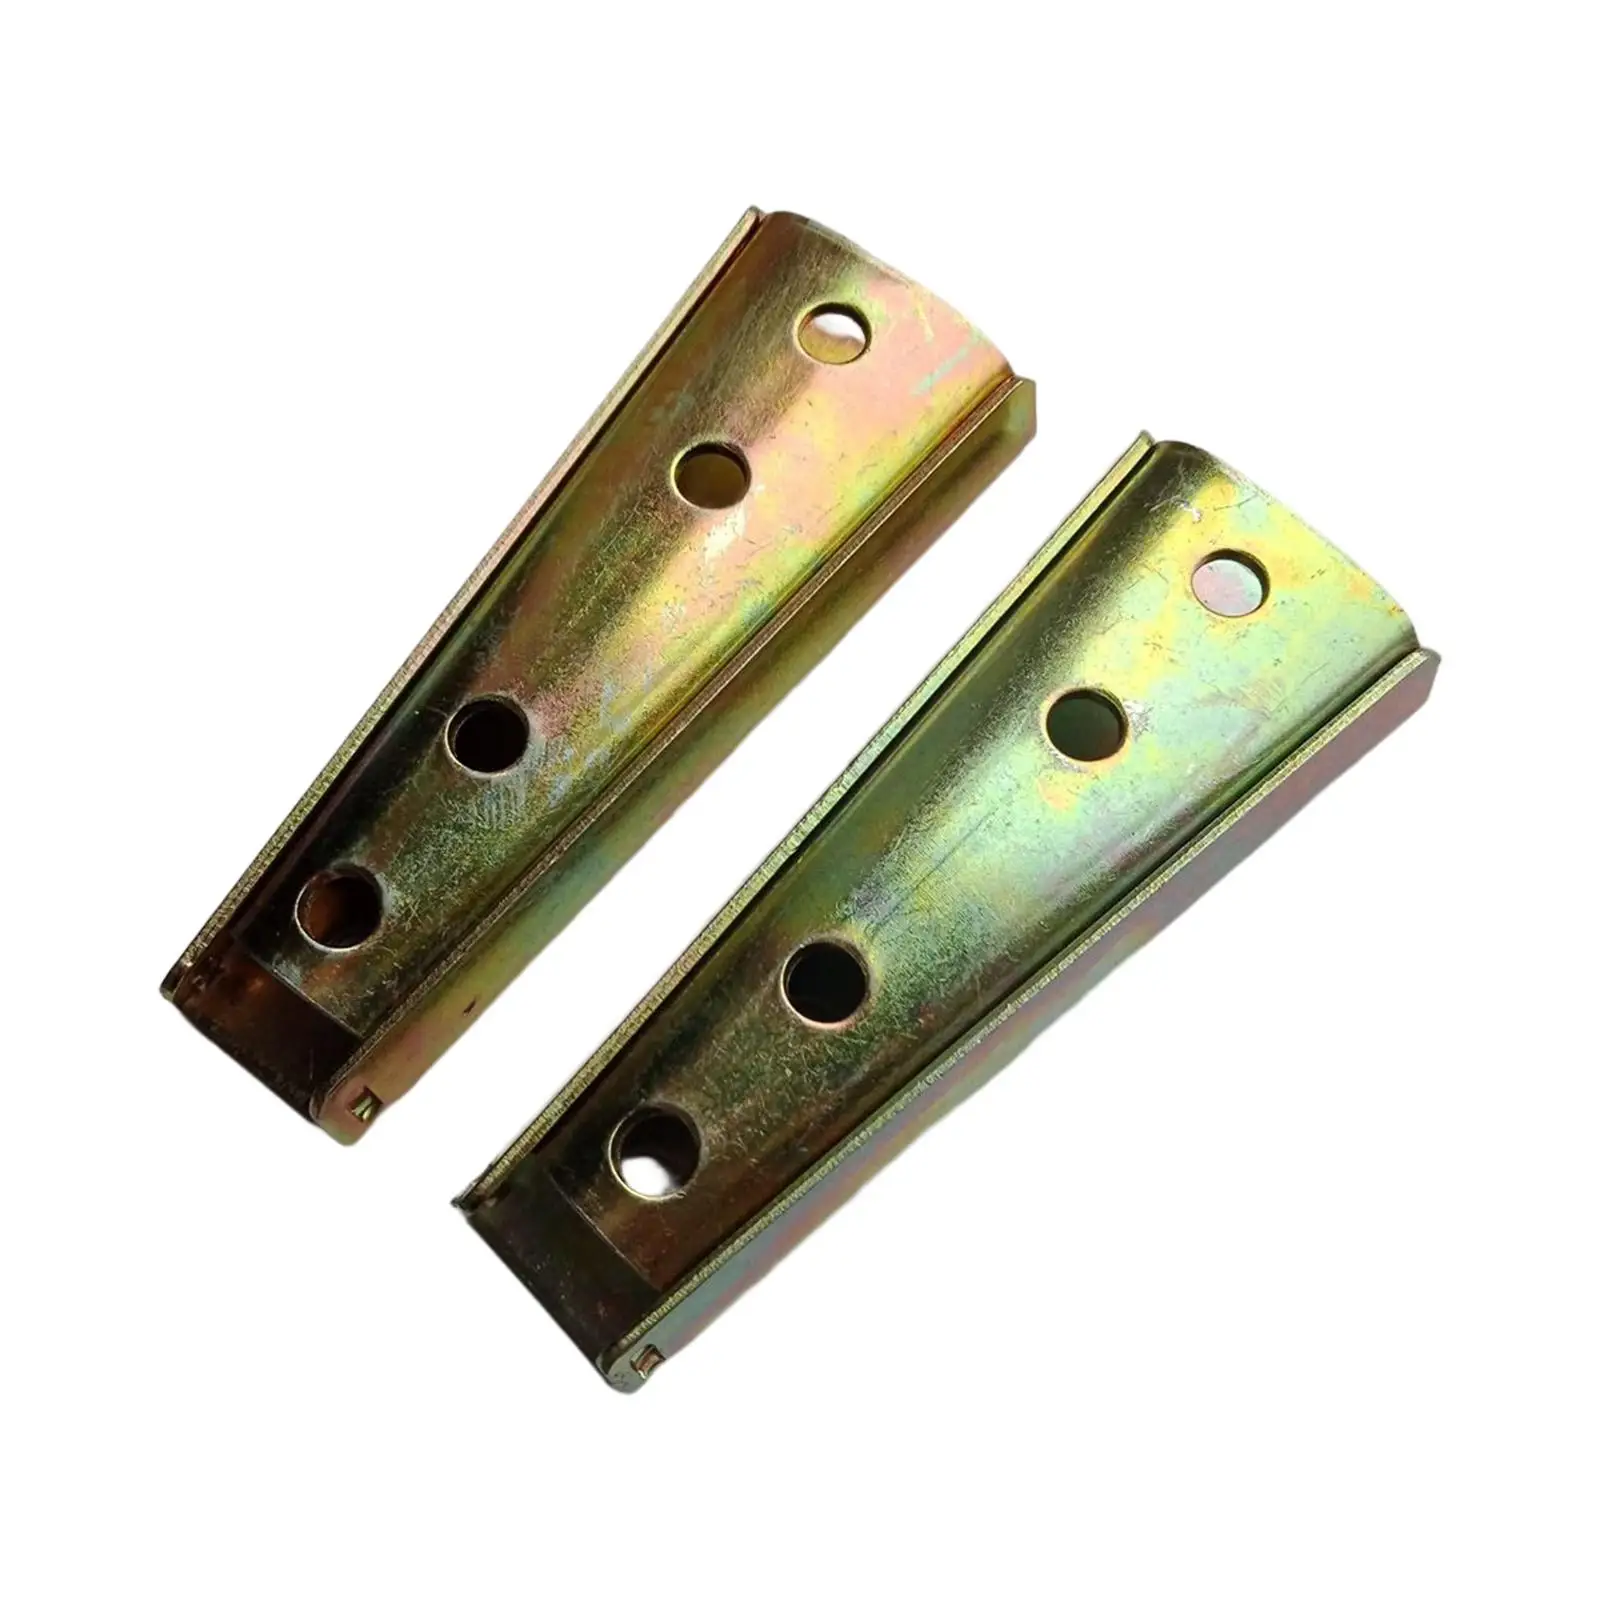 2 Pieces Metal Sofa Connector Bracket,Bed Frame Accessories,Tapered Diagonal Bolt Hardware,Sofa Bolt Connecting Pins,Sofa Latch